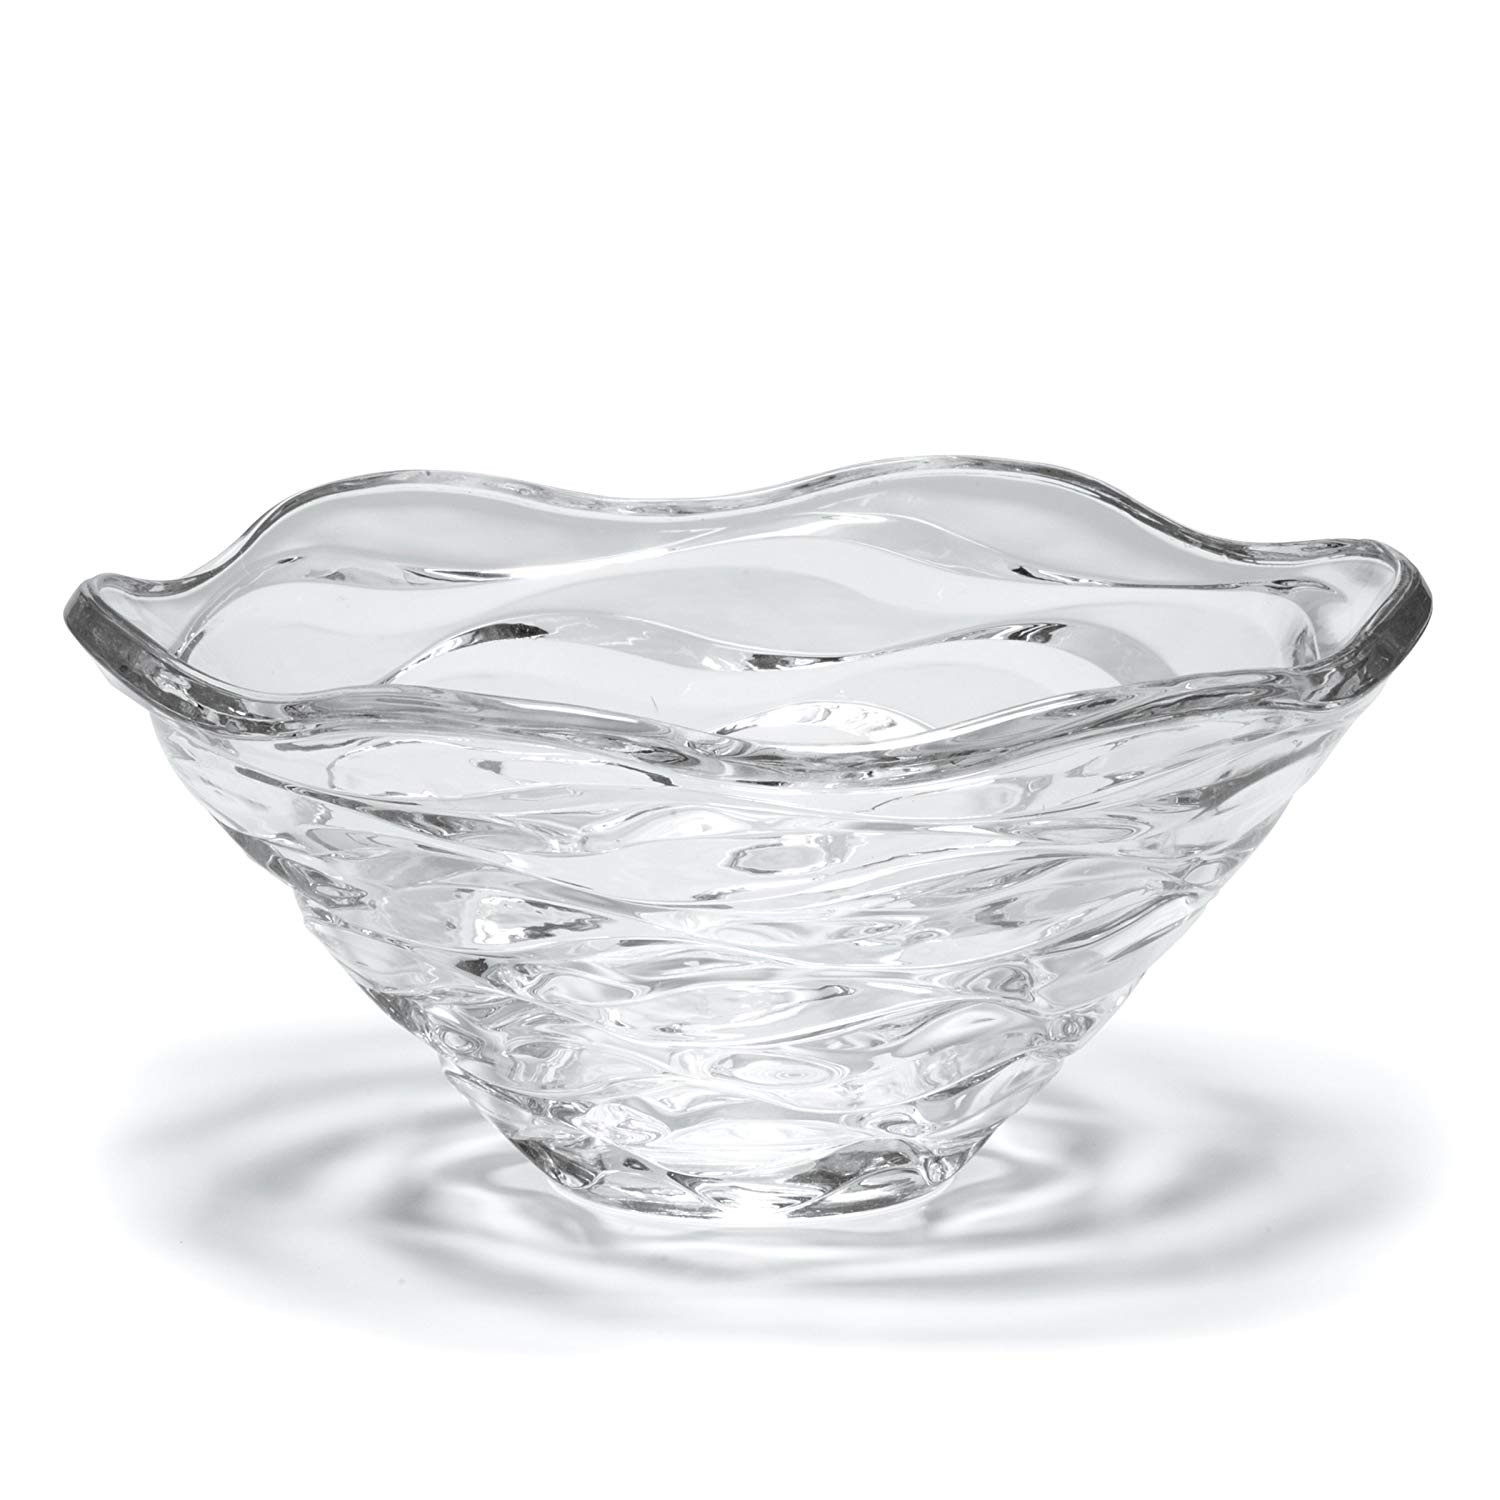 20 attractive Mikasa Florale Crystal Vase 2023 free download mikasa florale crystal vase of amazon com mikasa atlantic crystal decorative bowl 11 5 inch for amazon com mikasa atlantic crystal decorative bowl 11 5 inch centerpiece bowls kitchen dining